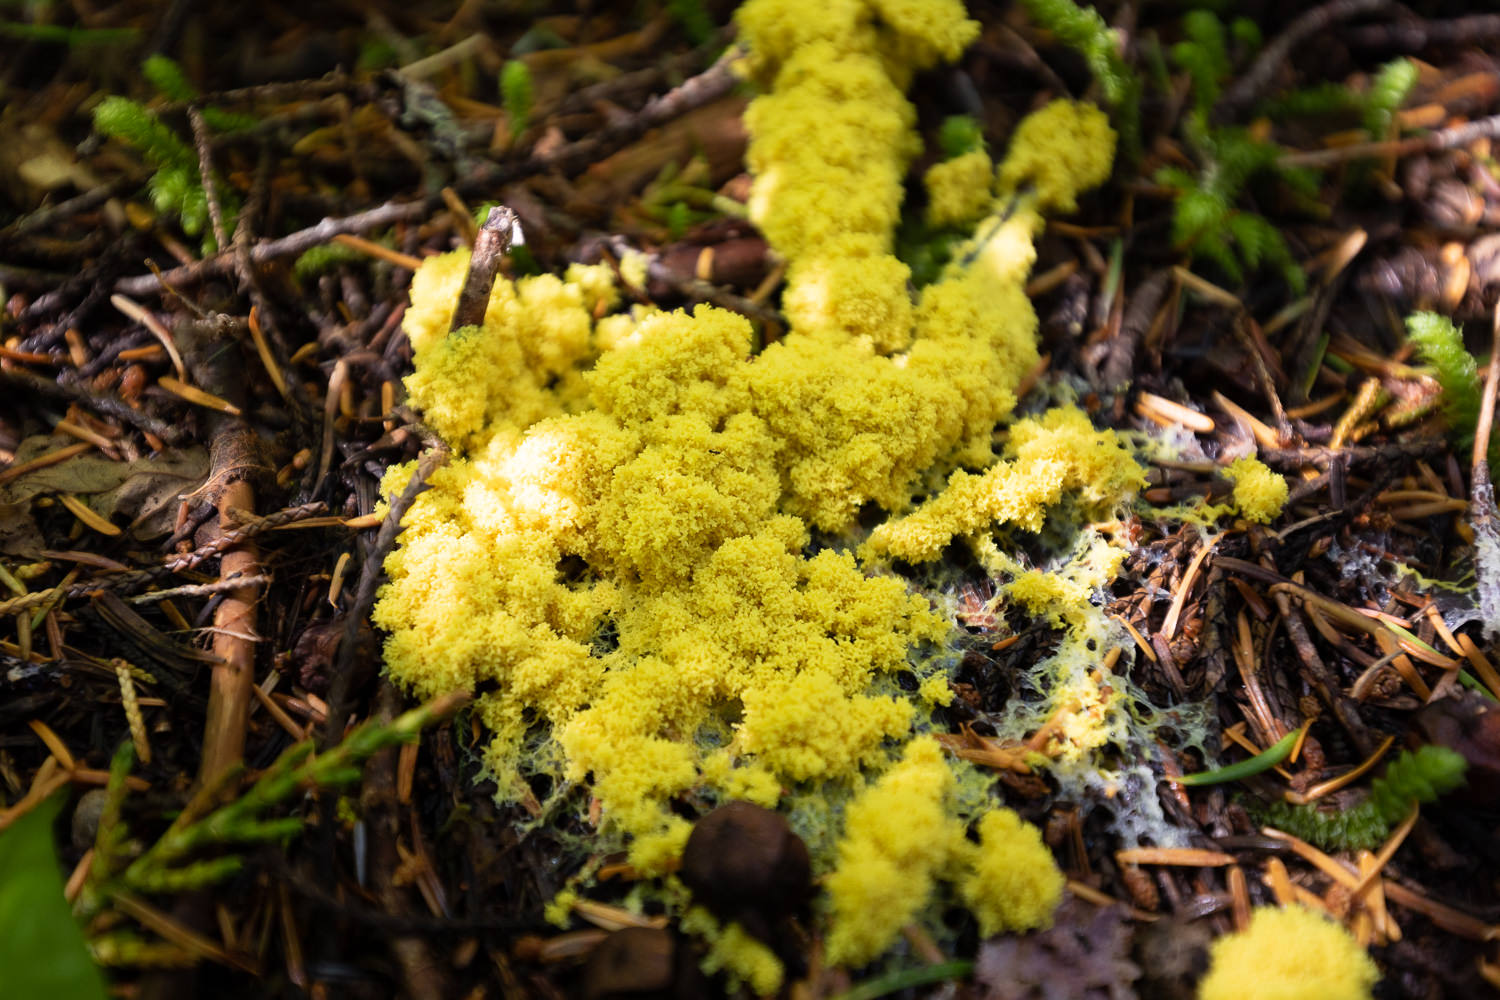 A bright yellow slime mold